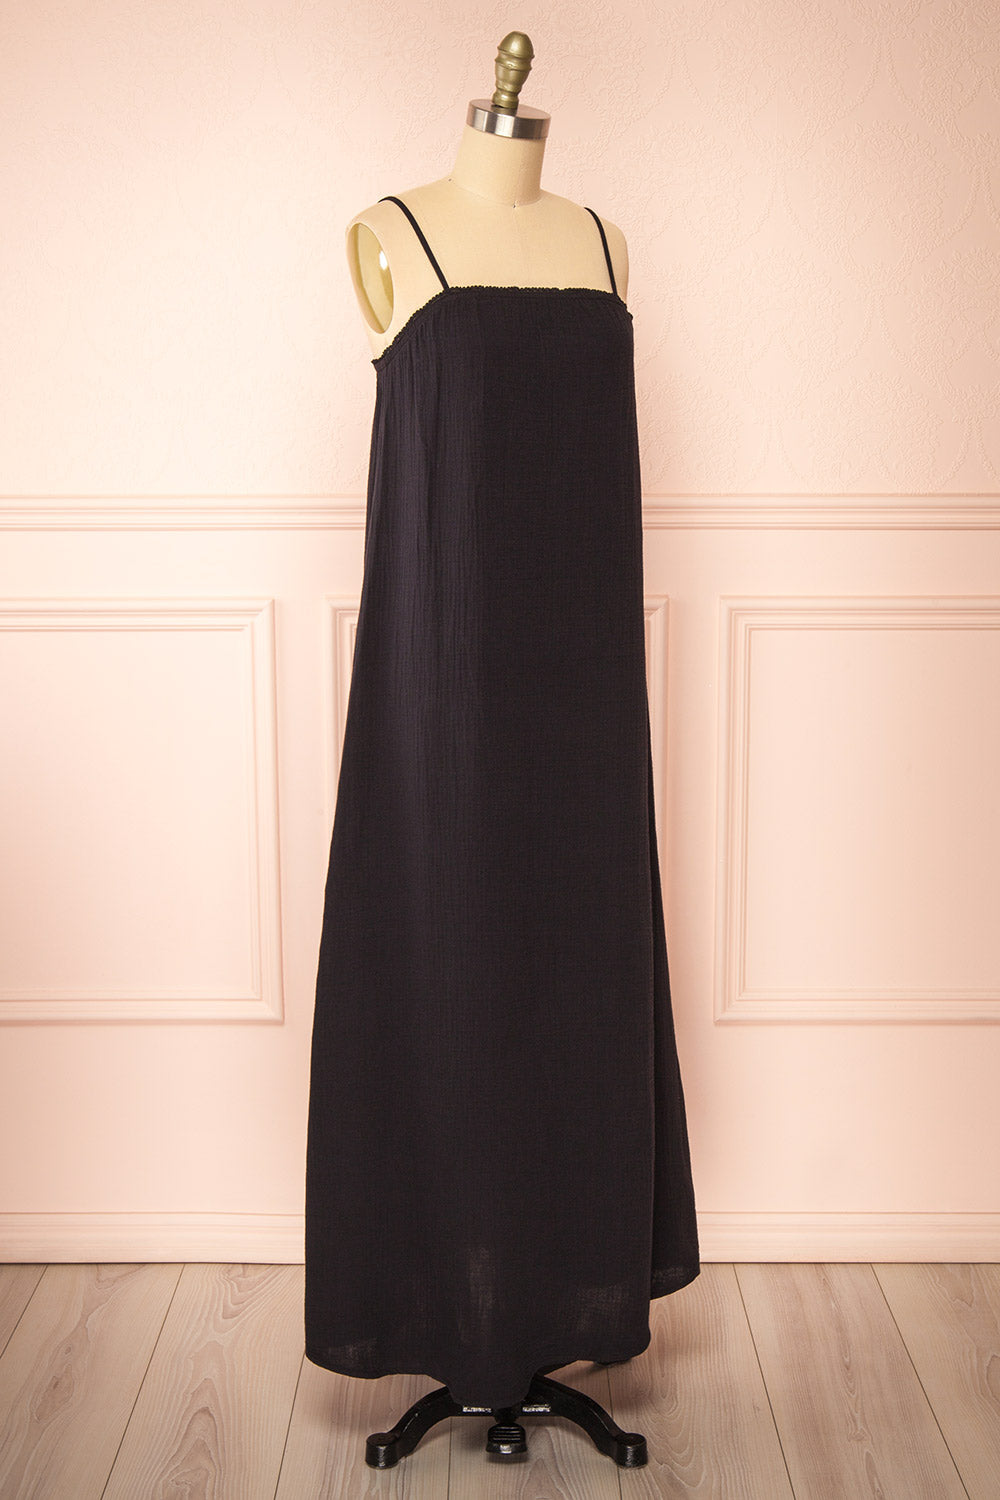 Marinet Black Long Loose-Fitted Dress | Boutique 1861 side view